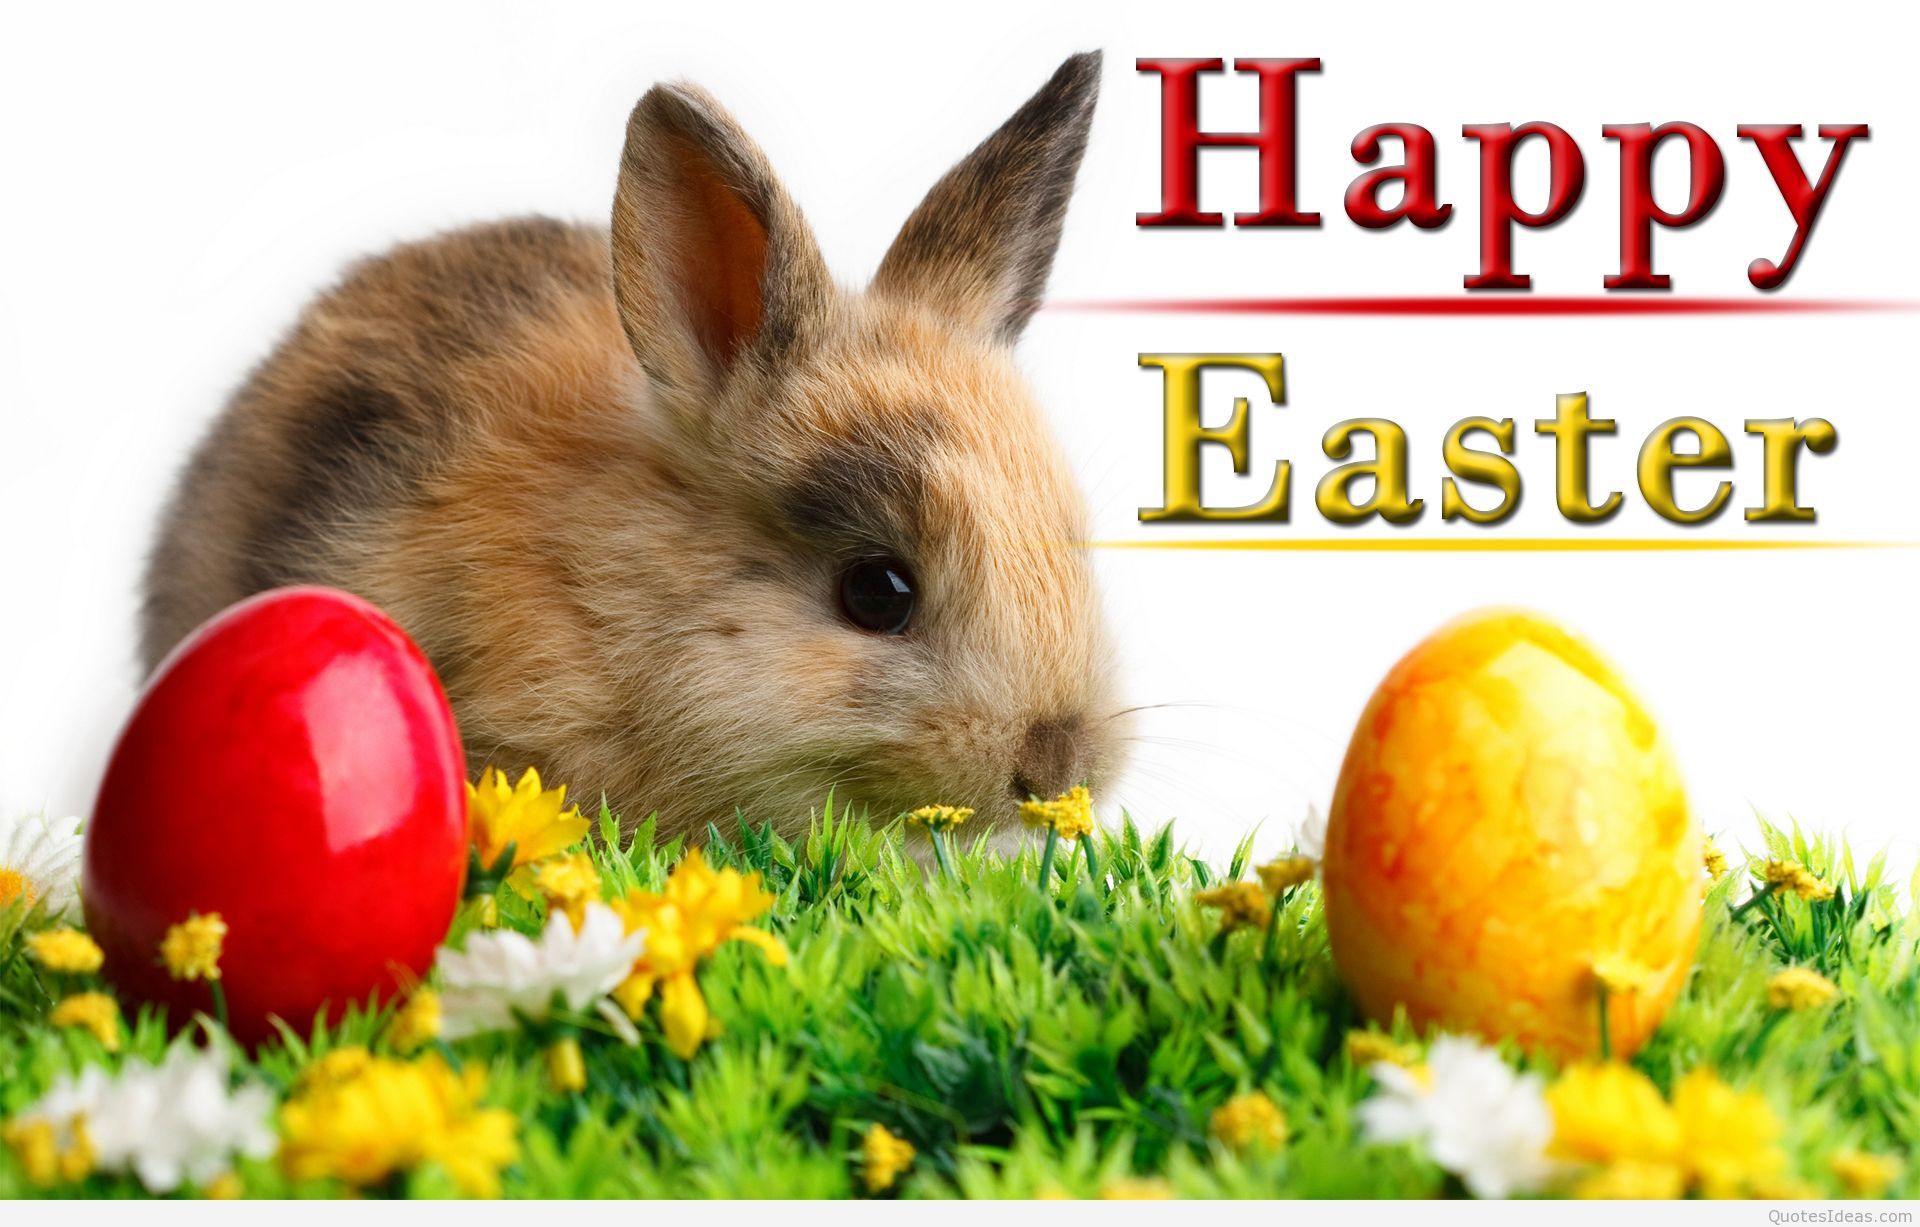 Happy Easter bunny wallpaper and quotes